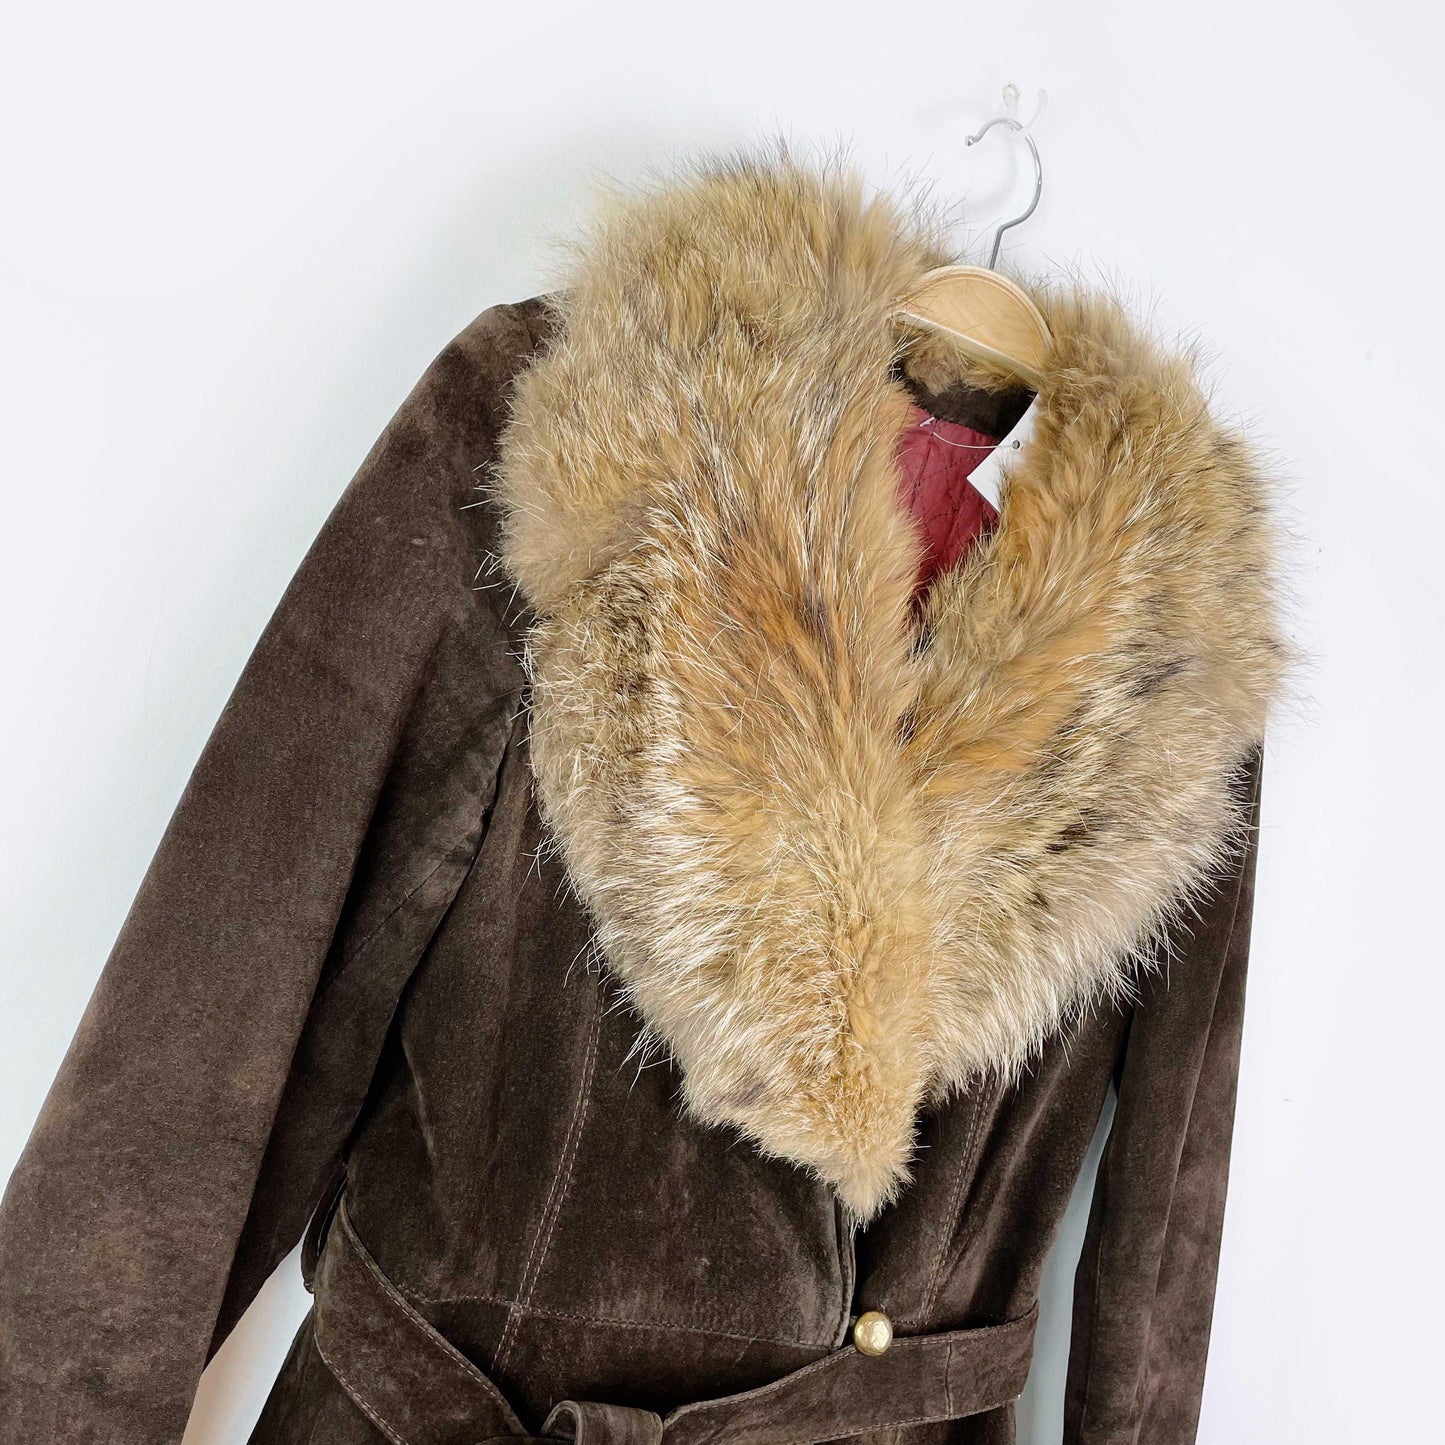 vintage suede penny lane trench coat w fox fur collar - size xs